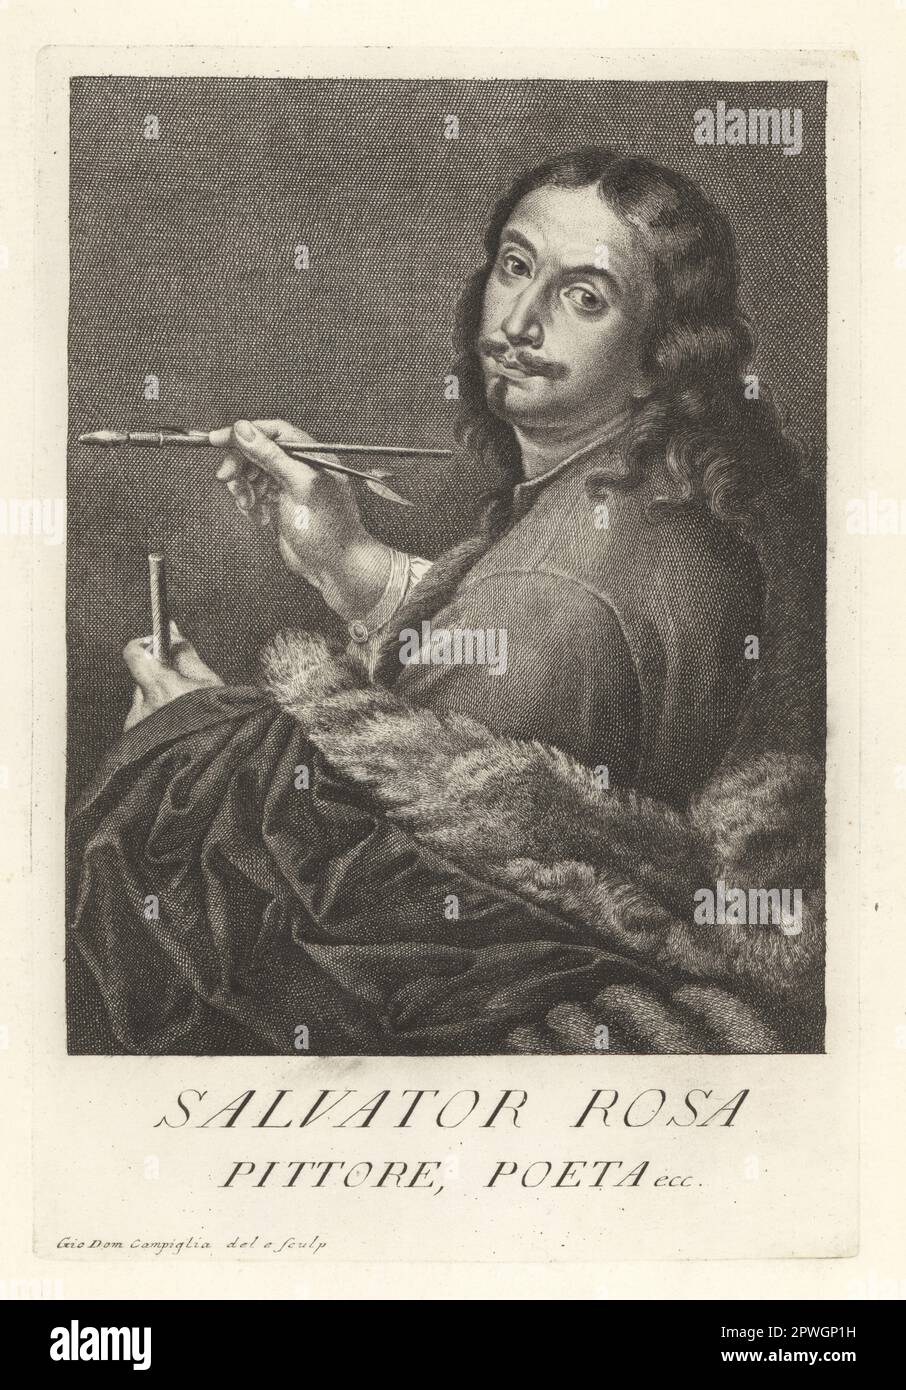 Salvator Rosa, Italian Baroque painter and poet, 1615-1673. Painted romanticized landscapes and history paintings. With paint brush and quill pen. Pittore, Poeta. Copperplate engraving drawn and engraved by Giovanni Domenico Campiglia after a self portrait by the artist from Francesco Moucke's Museo Florentino (Museum Florentinum), Serie di Ritratti de Pittori (Series of Portraits of Painters) stamperia Mouckiana, Florence, 1752-62. Stock Photo